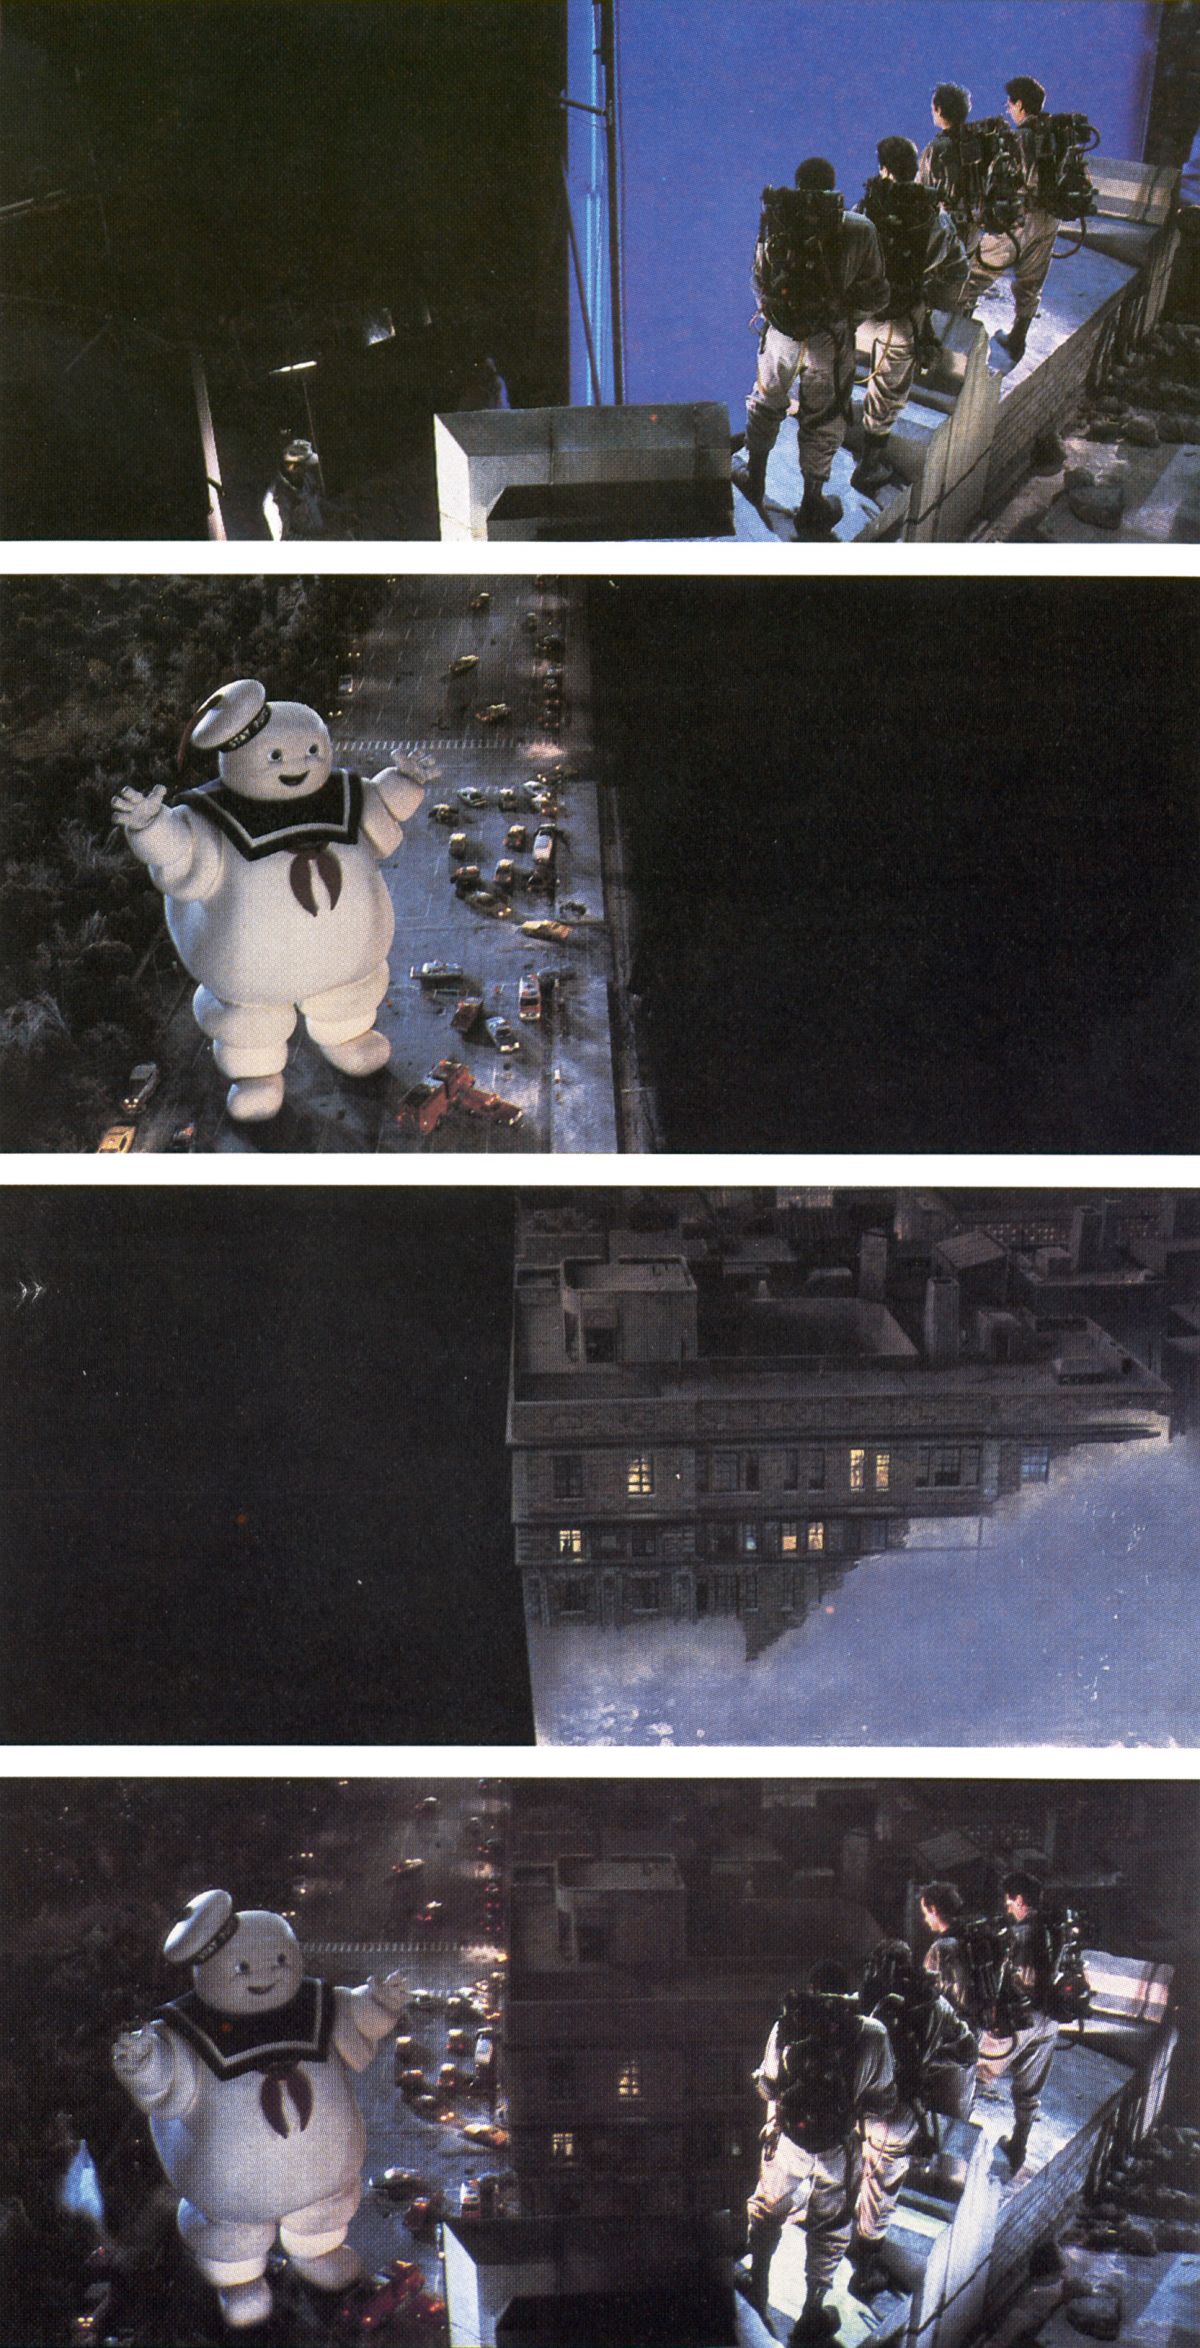 Frame enlargements of elements and composite for the scene in which Stay Puft Man comes looking for the Ghostbusters. The live-action element was shot against a bluescreen at the Burbank Studios. The Stay Puft Man was shot on a miniature set at BFC, and a matte painting by Yuricich was used to tie the two together.